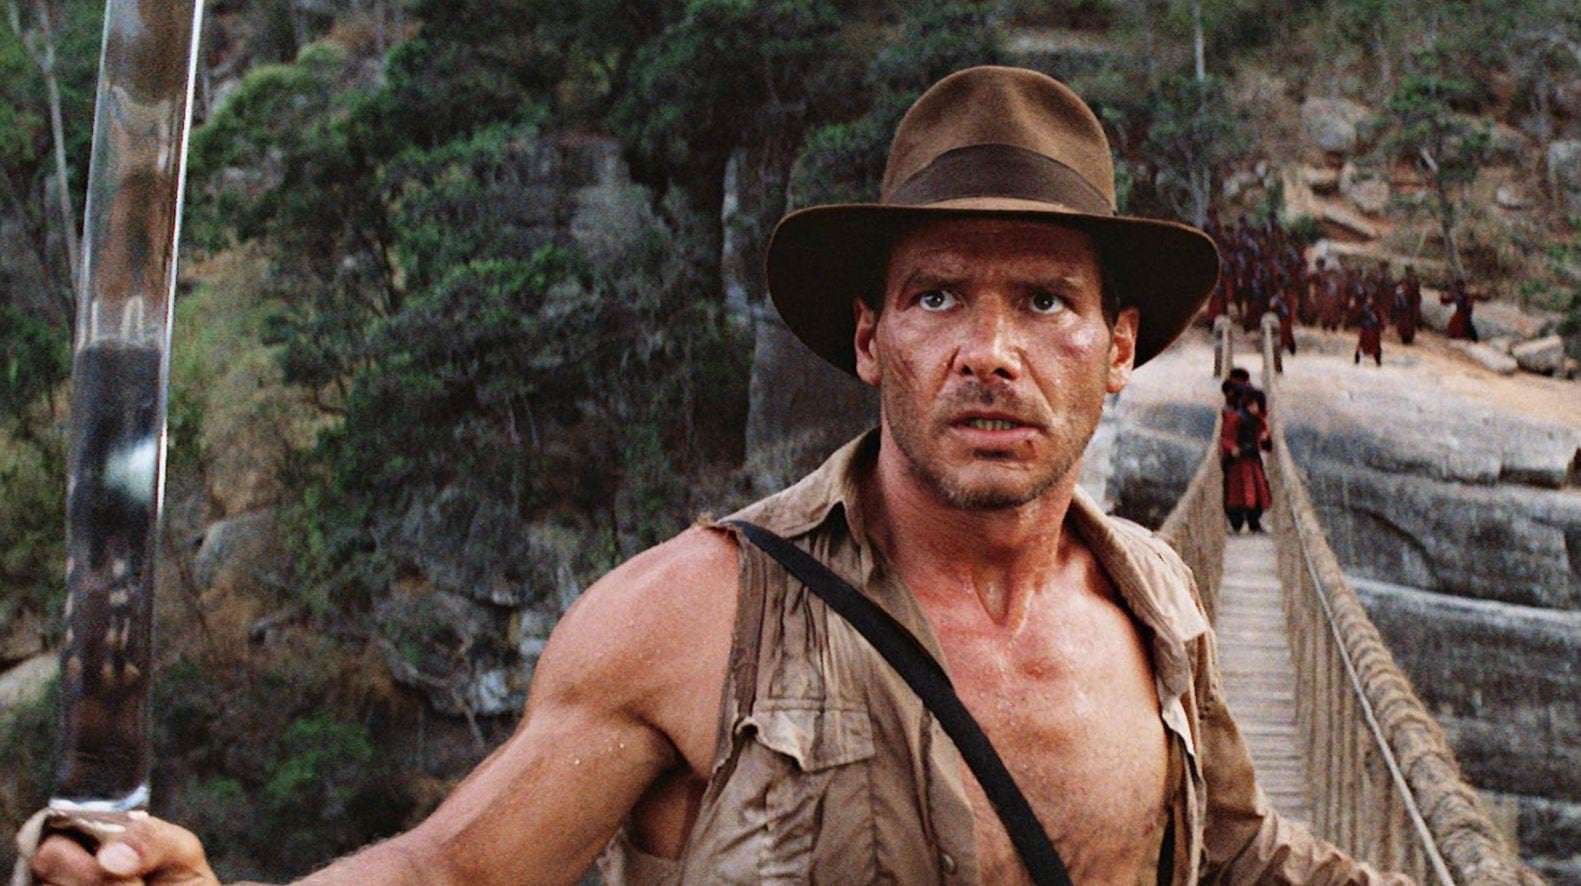 image for Indiana Jones Fedora and Harry Potter Wand Among Iconic Movie Props Being Auctioned Next Week